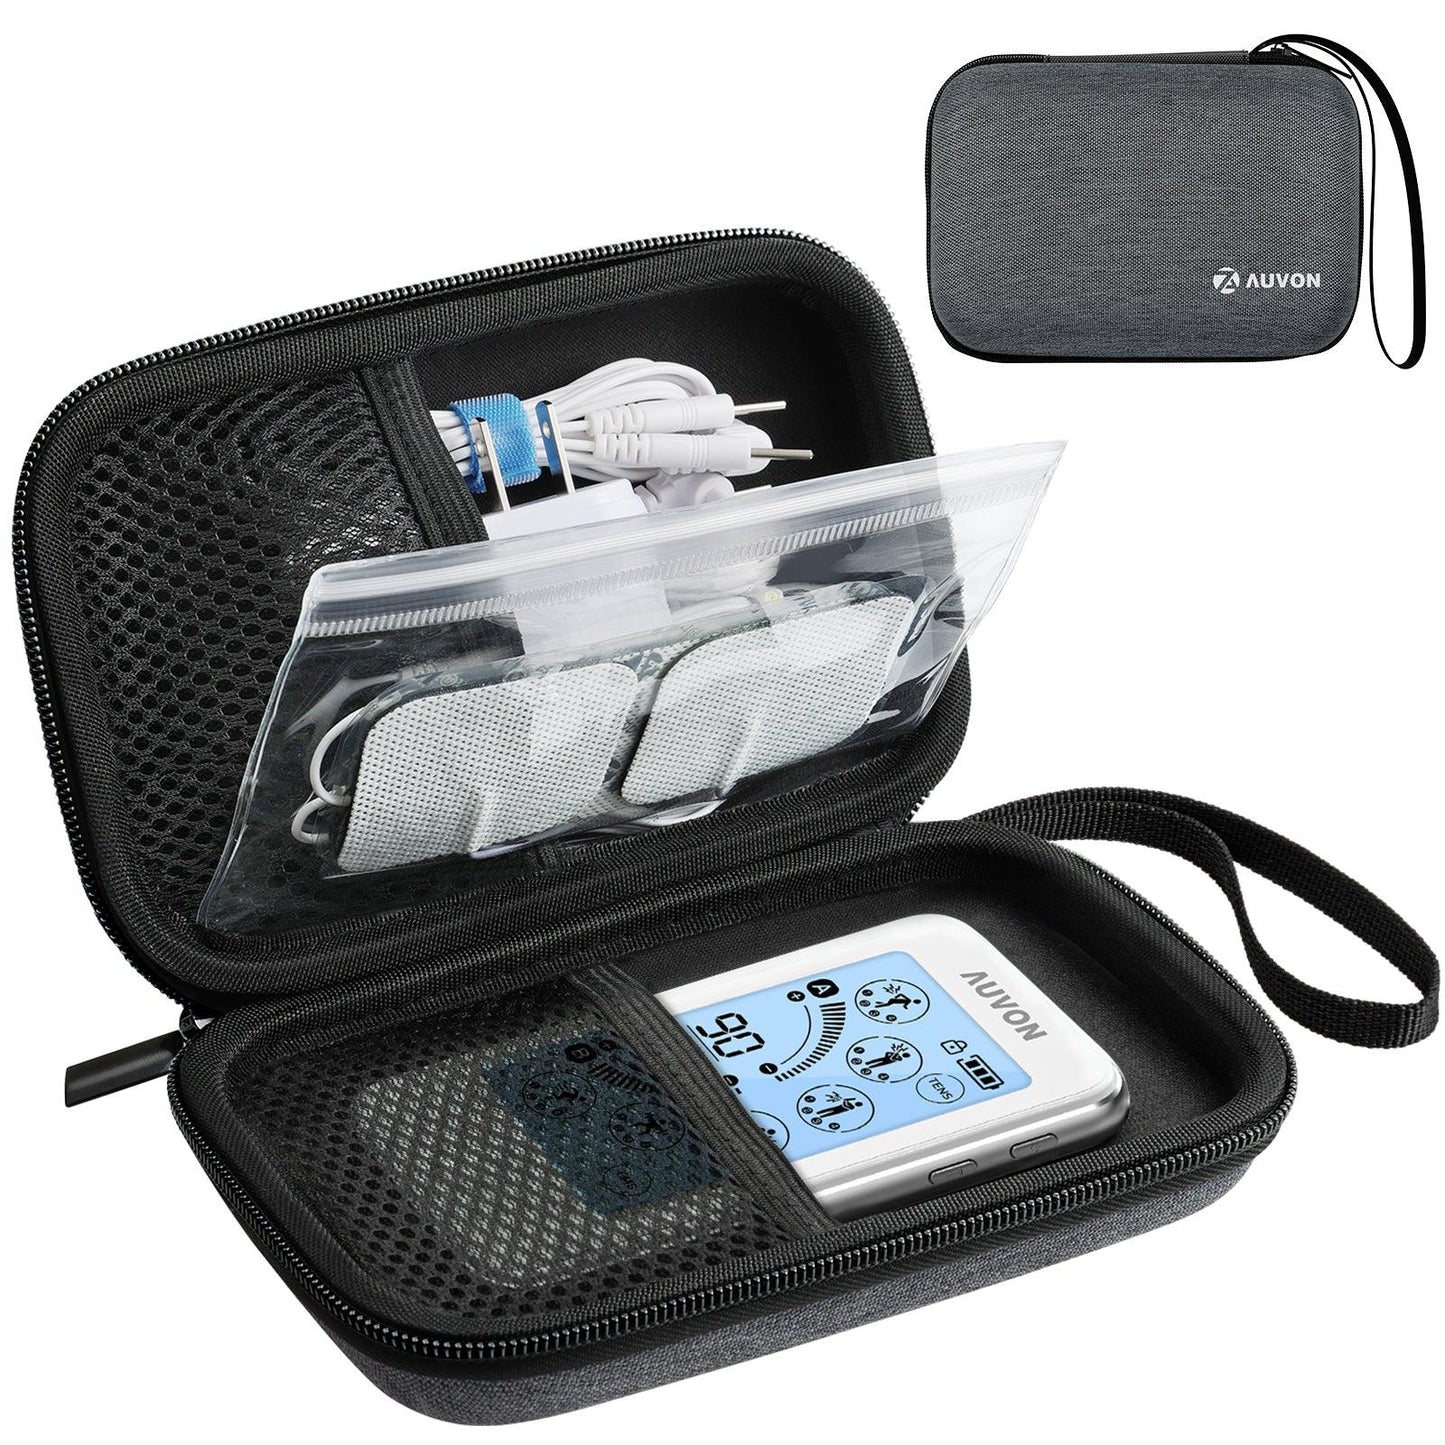 AUVON Professional Hard EVA Travel Case with a Sealed Bag for TENS Unit and Electrode Pads, Shockproof & Waterproof Carrying Case for Accessories (Case Only) - AUVON